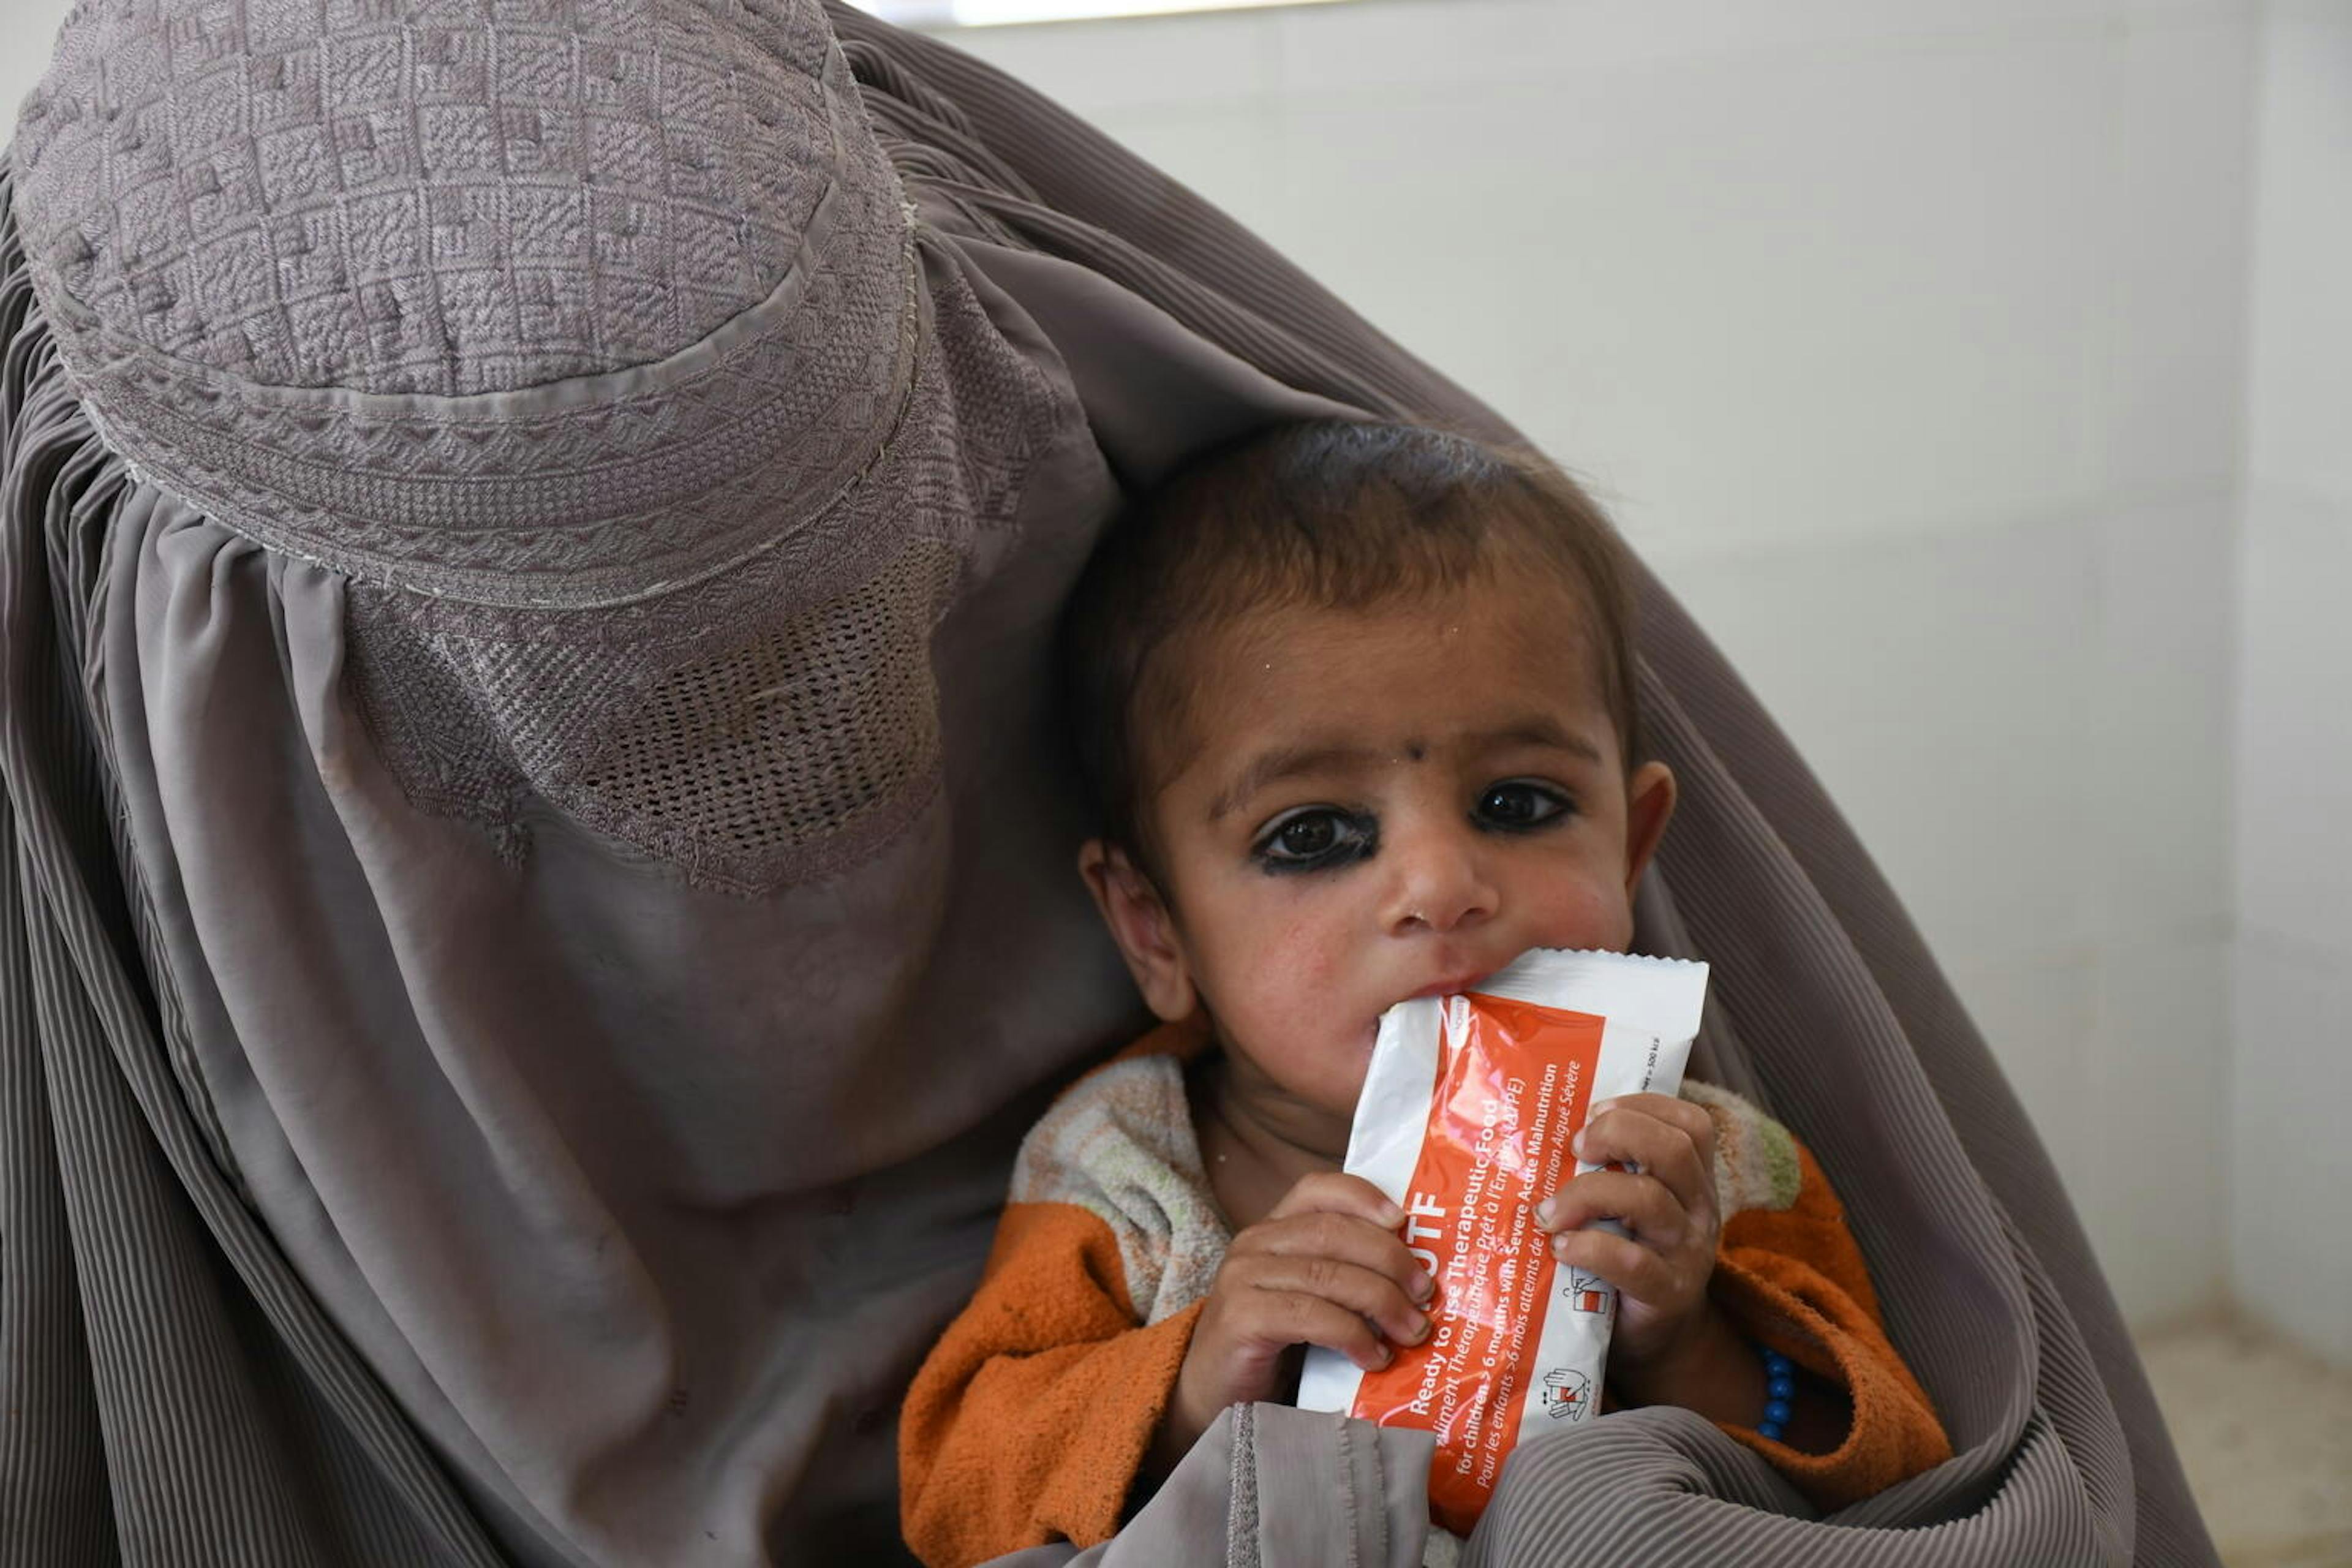 A baby boy in Kandahar, Afghanistan eats a sachet of ready-to-use therapeutic food. He is being treated for severe acute malnutrition at Mirwais Regional Hospital.